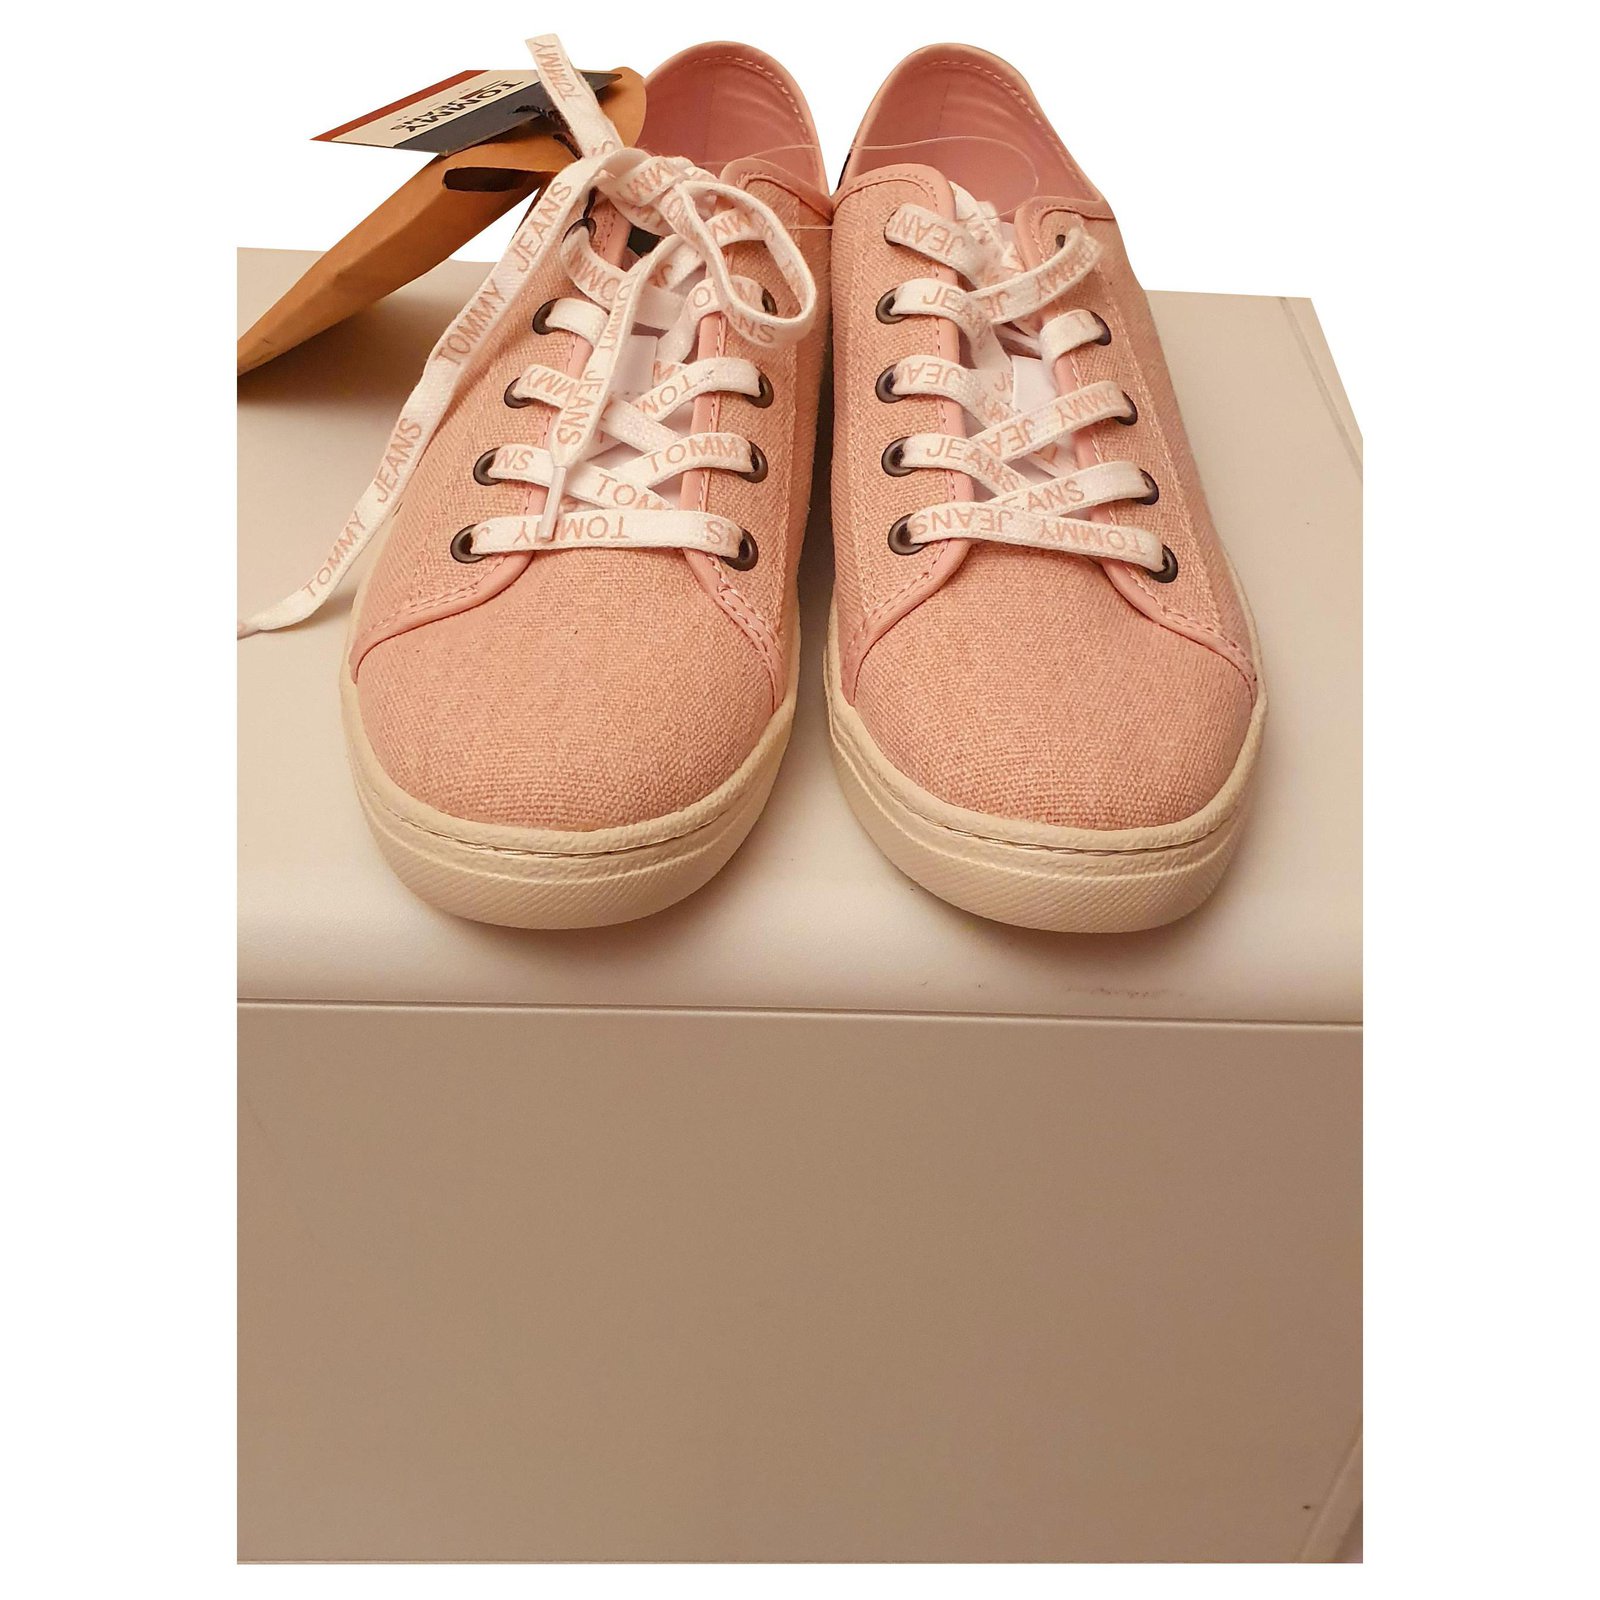 pink tommy hilfiger sneakers